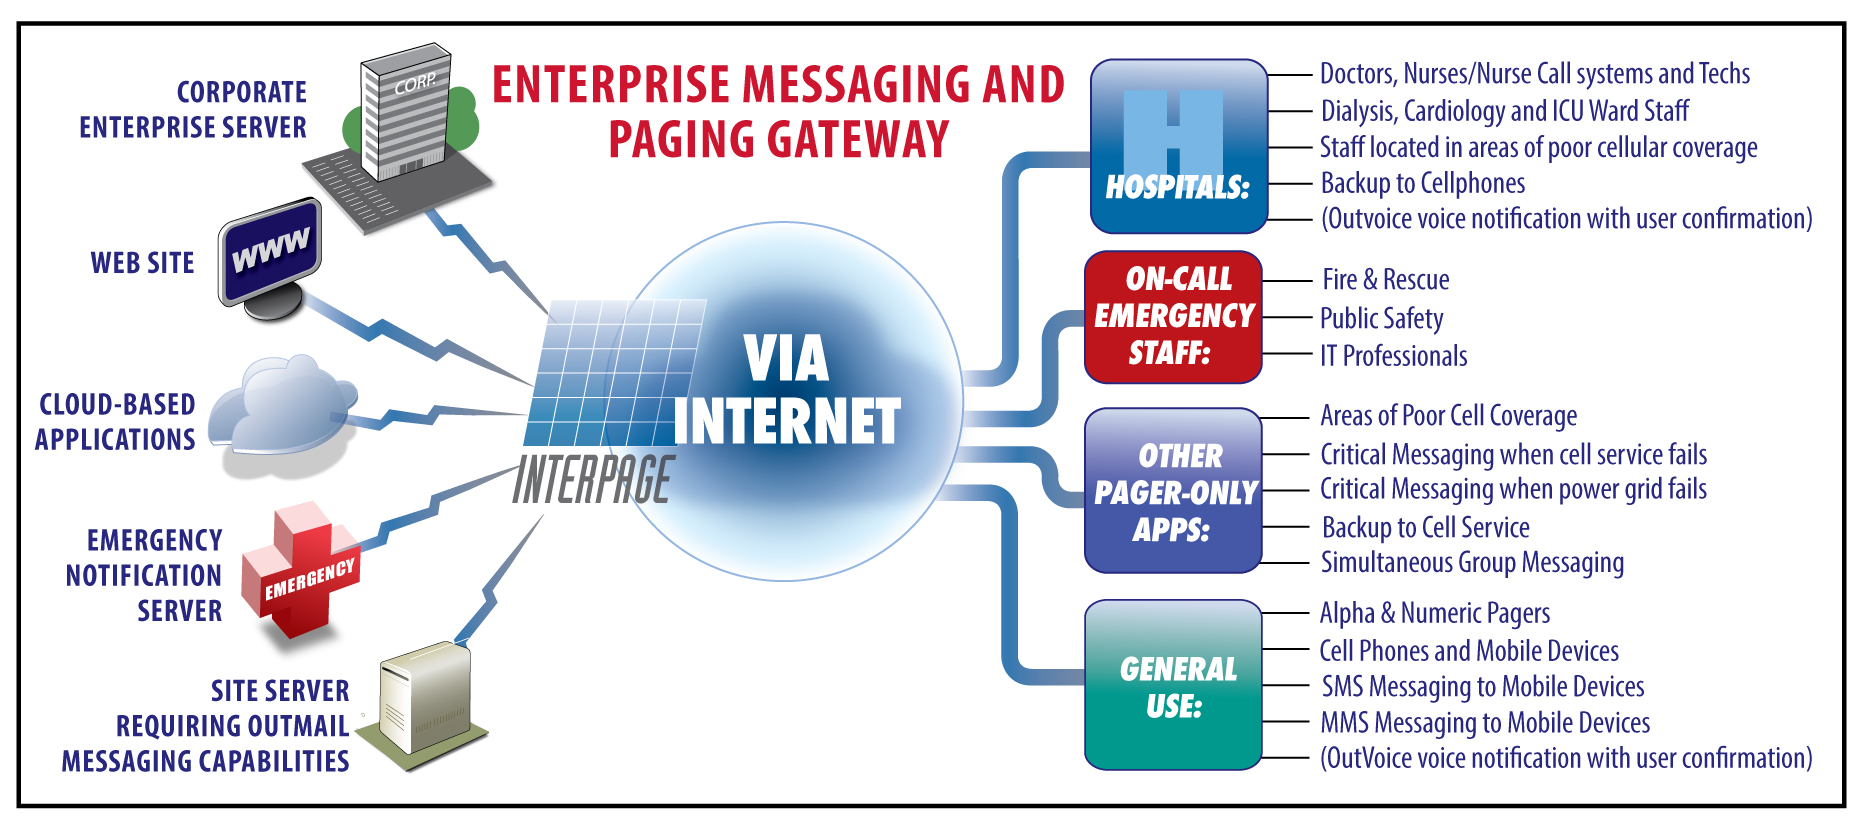 Interpage Messaging and Paging Gateway diagram depicting hospitals, cloud-based servers lacking messaging connectivity, and other Internet devices using the Interpage Messaging and Paging gateway to connect to doctors, medical techs, on-call personnel, and in general mobile phones, pagers, and other wireless and messaging devices